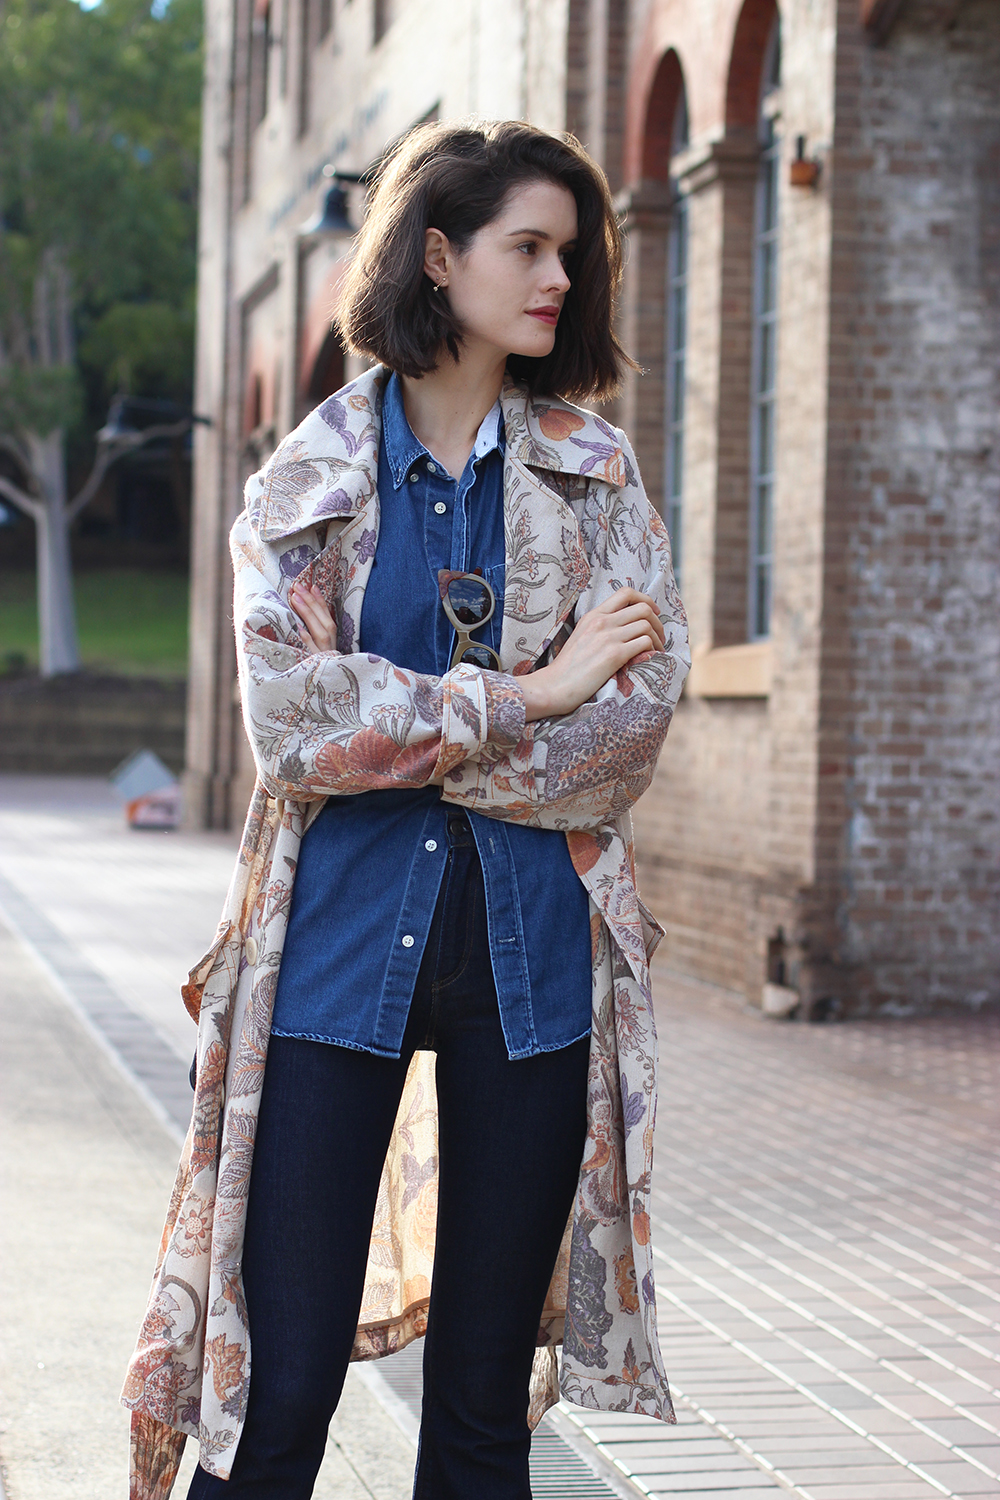 Australian Fashion Blog | Chloe Hill wearing Karen walker trench coat, acne denim shirt, pared sunglasses, Alila floral print bag and citizens of humanity sculpt flares at carriage works